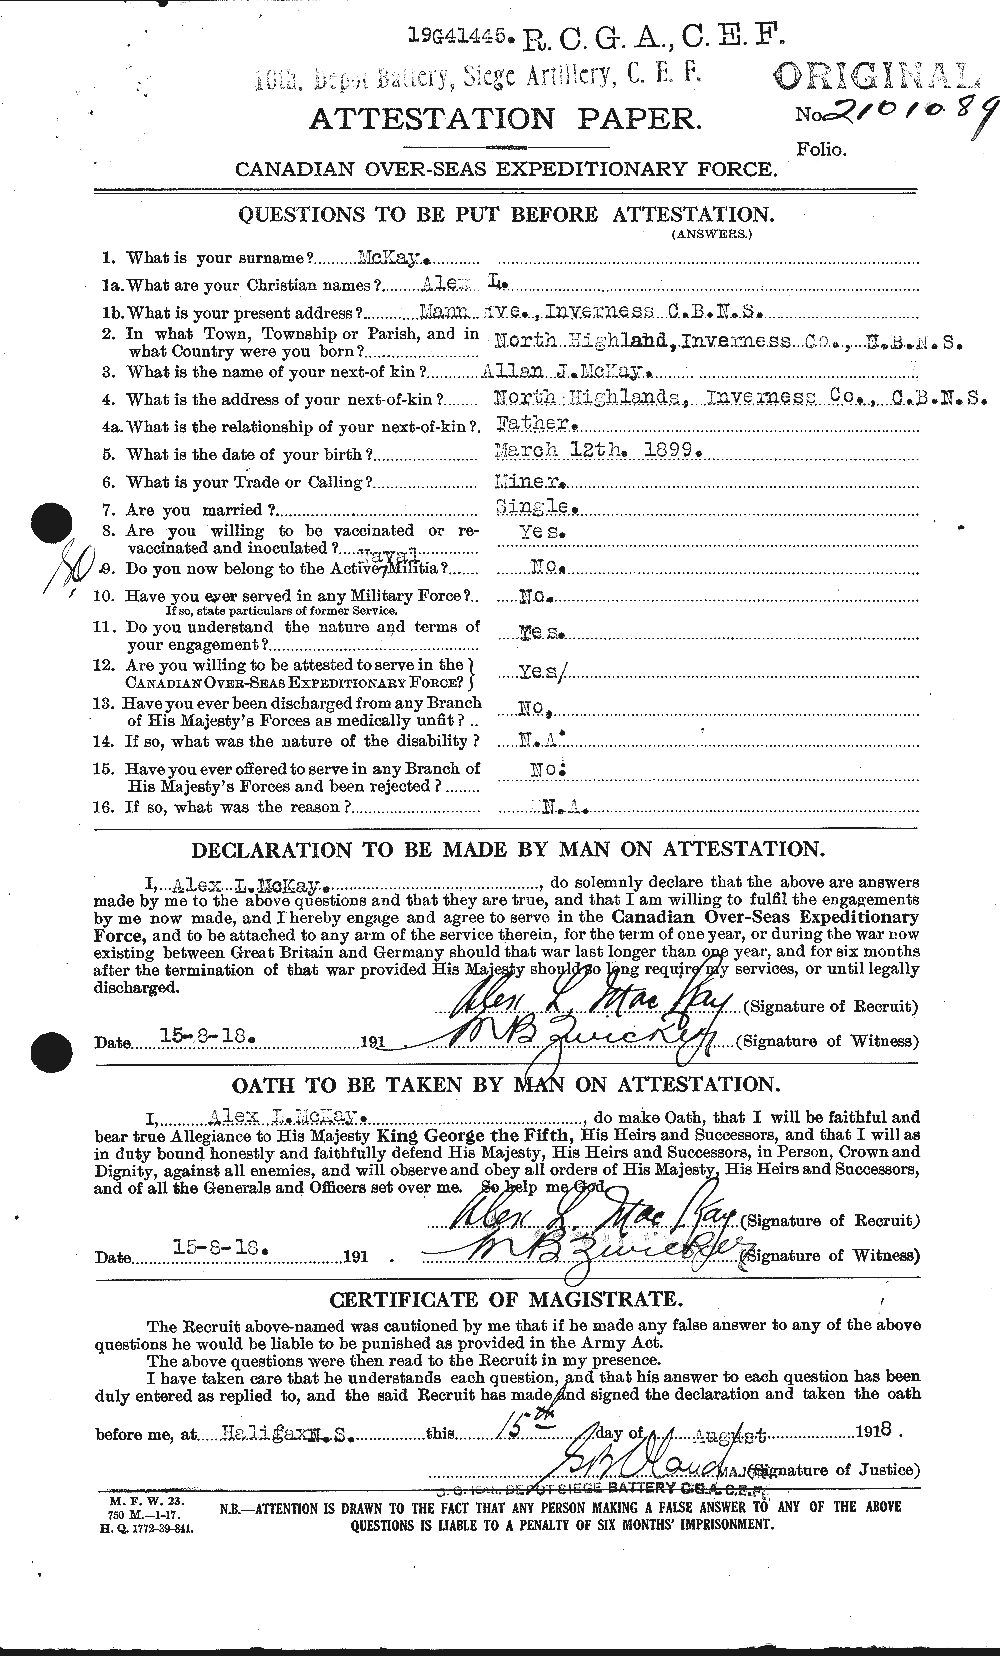 Personnel Records of the First World War - CEF 530898a